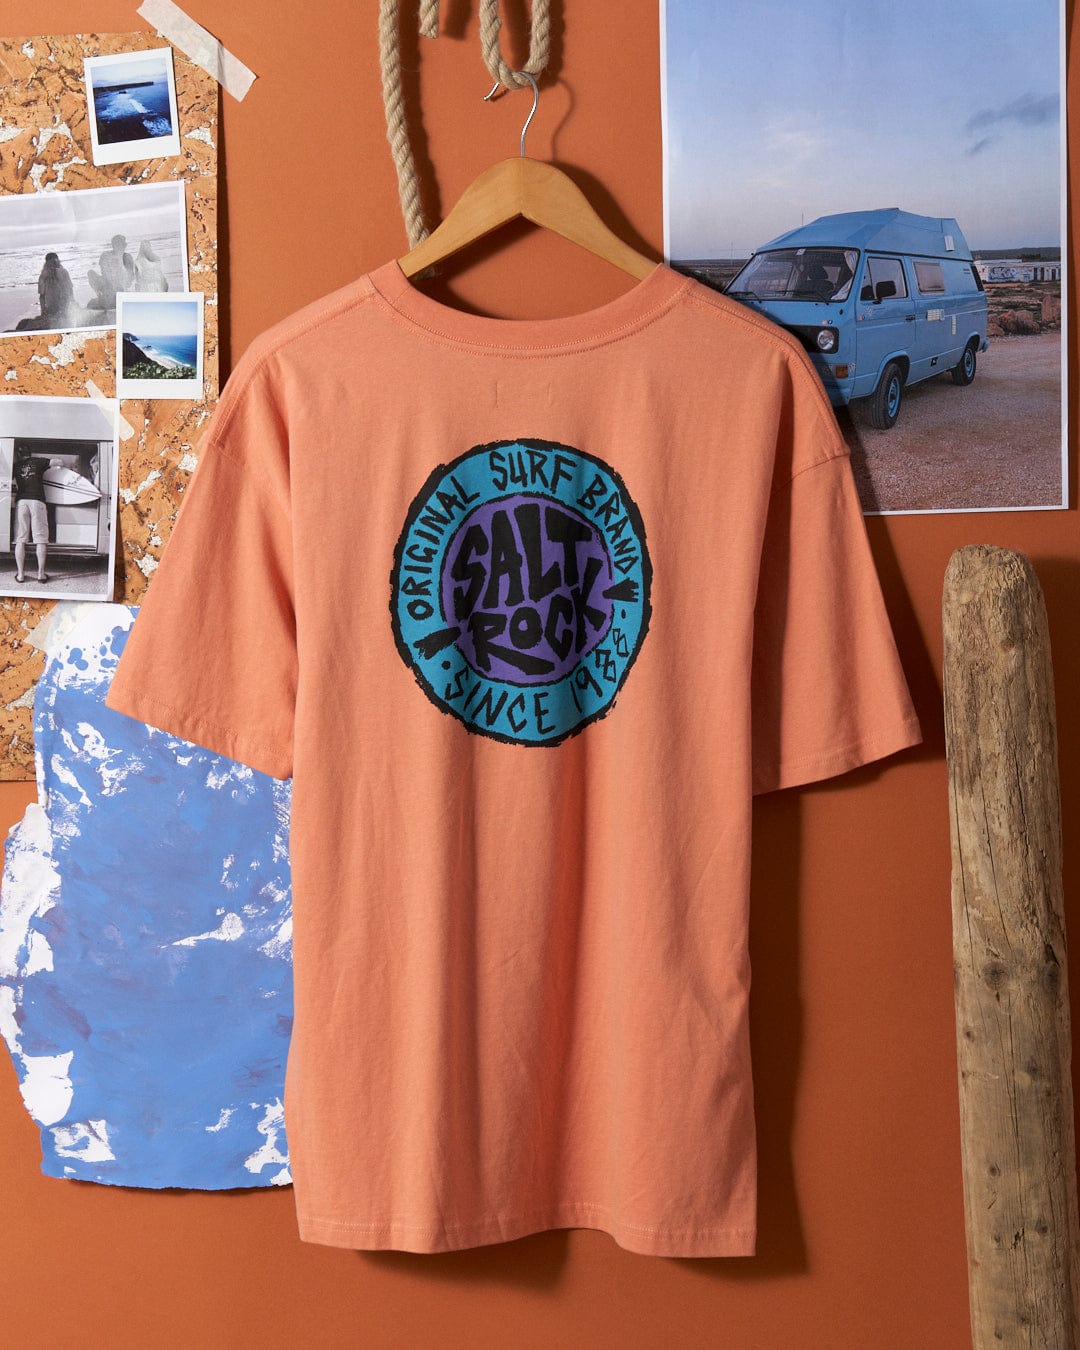 Saltrock SR Originals - Mens Short Sleeve T-Shirt in Peach hanging on a wall with coastal themed decor.